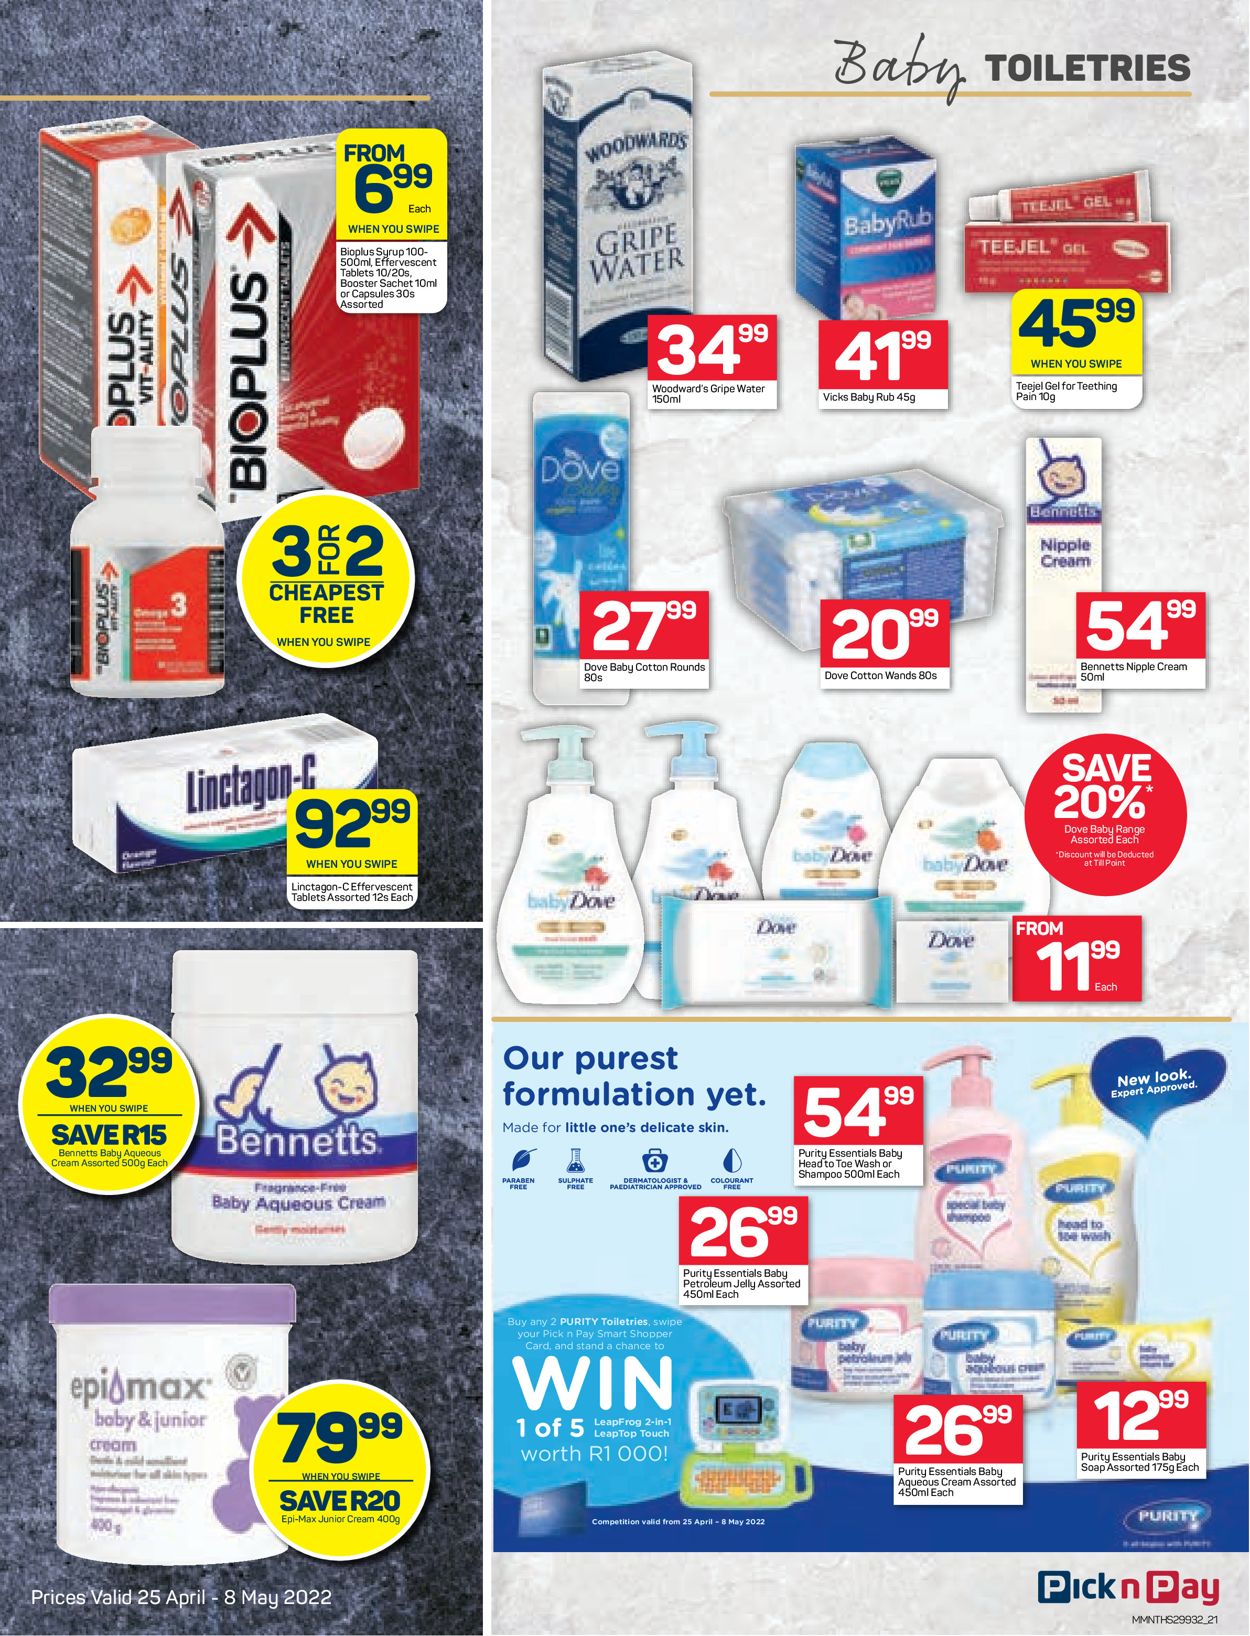 Pick n Pay Catalogue - 2022/04/25-2022/05/08 (Page 21)